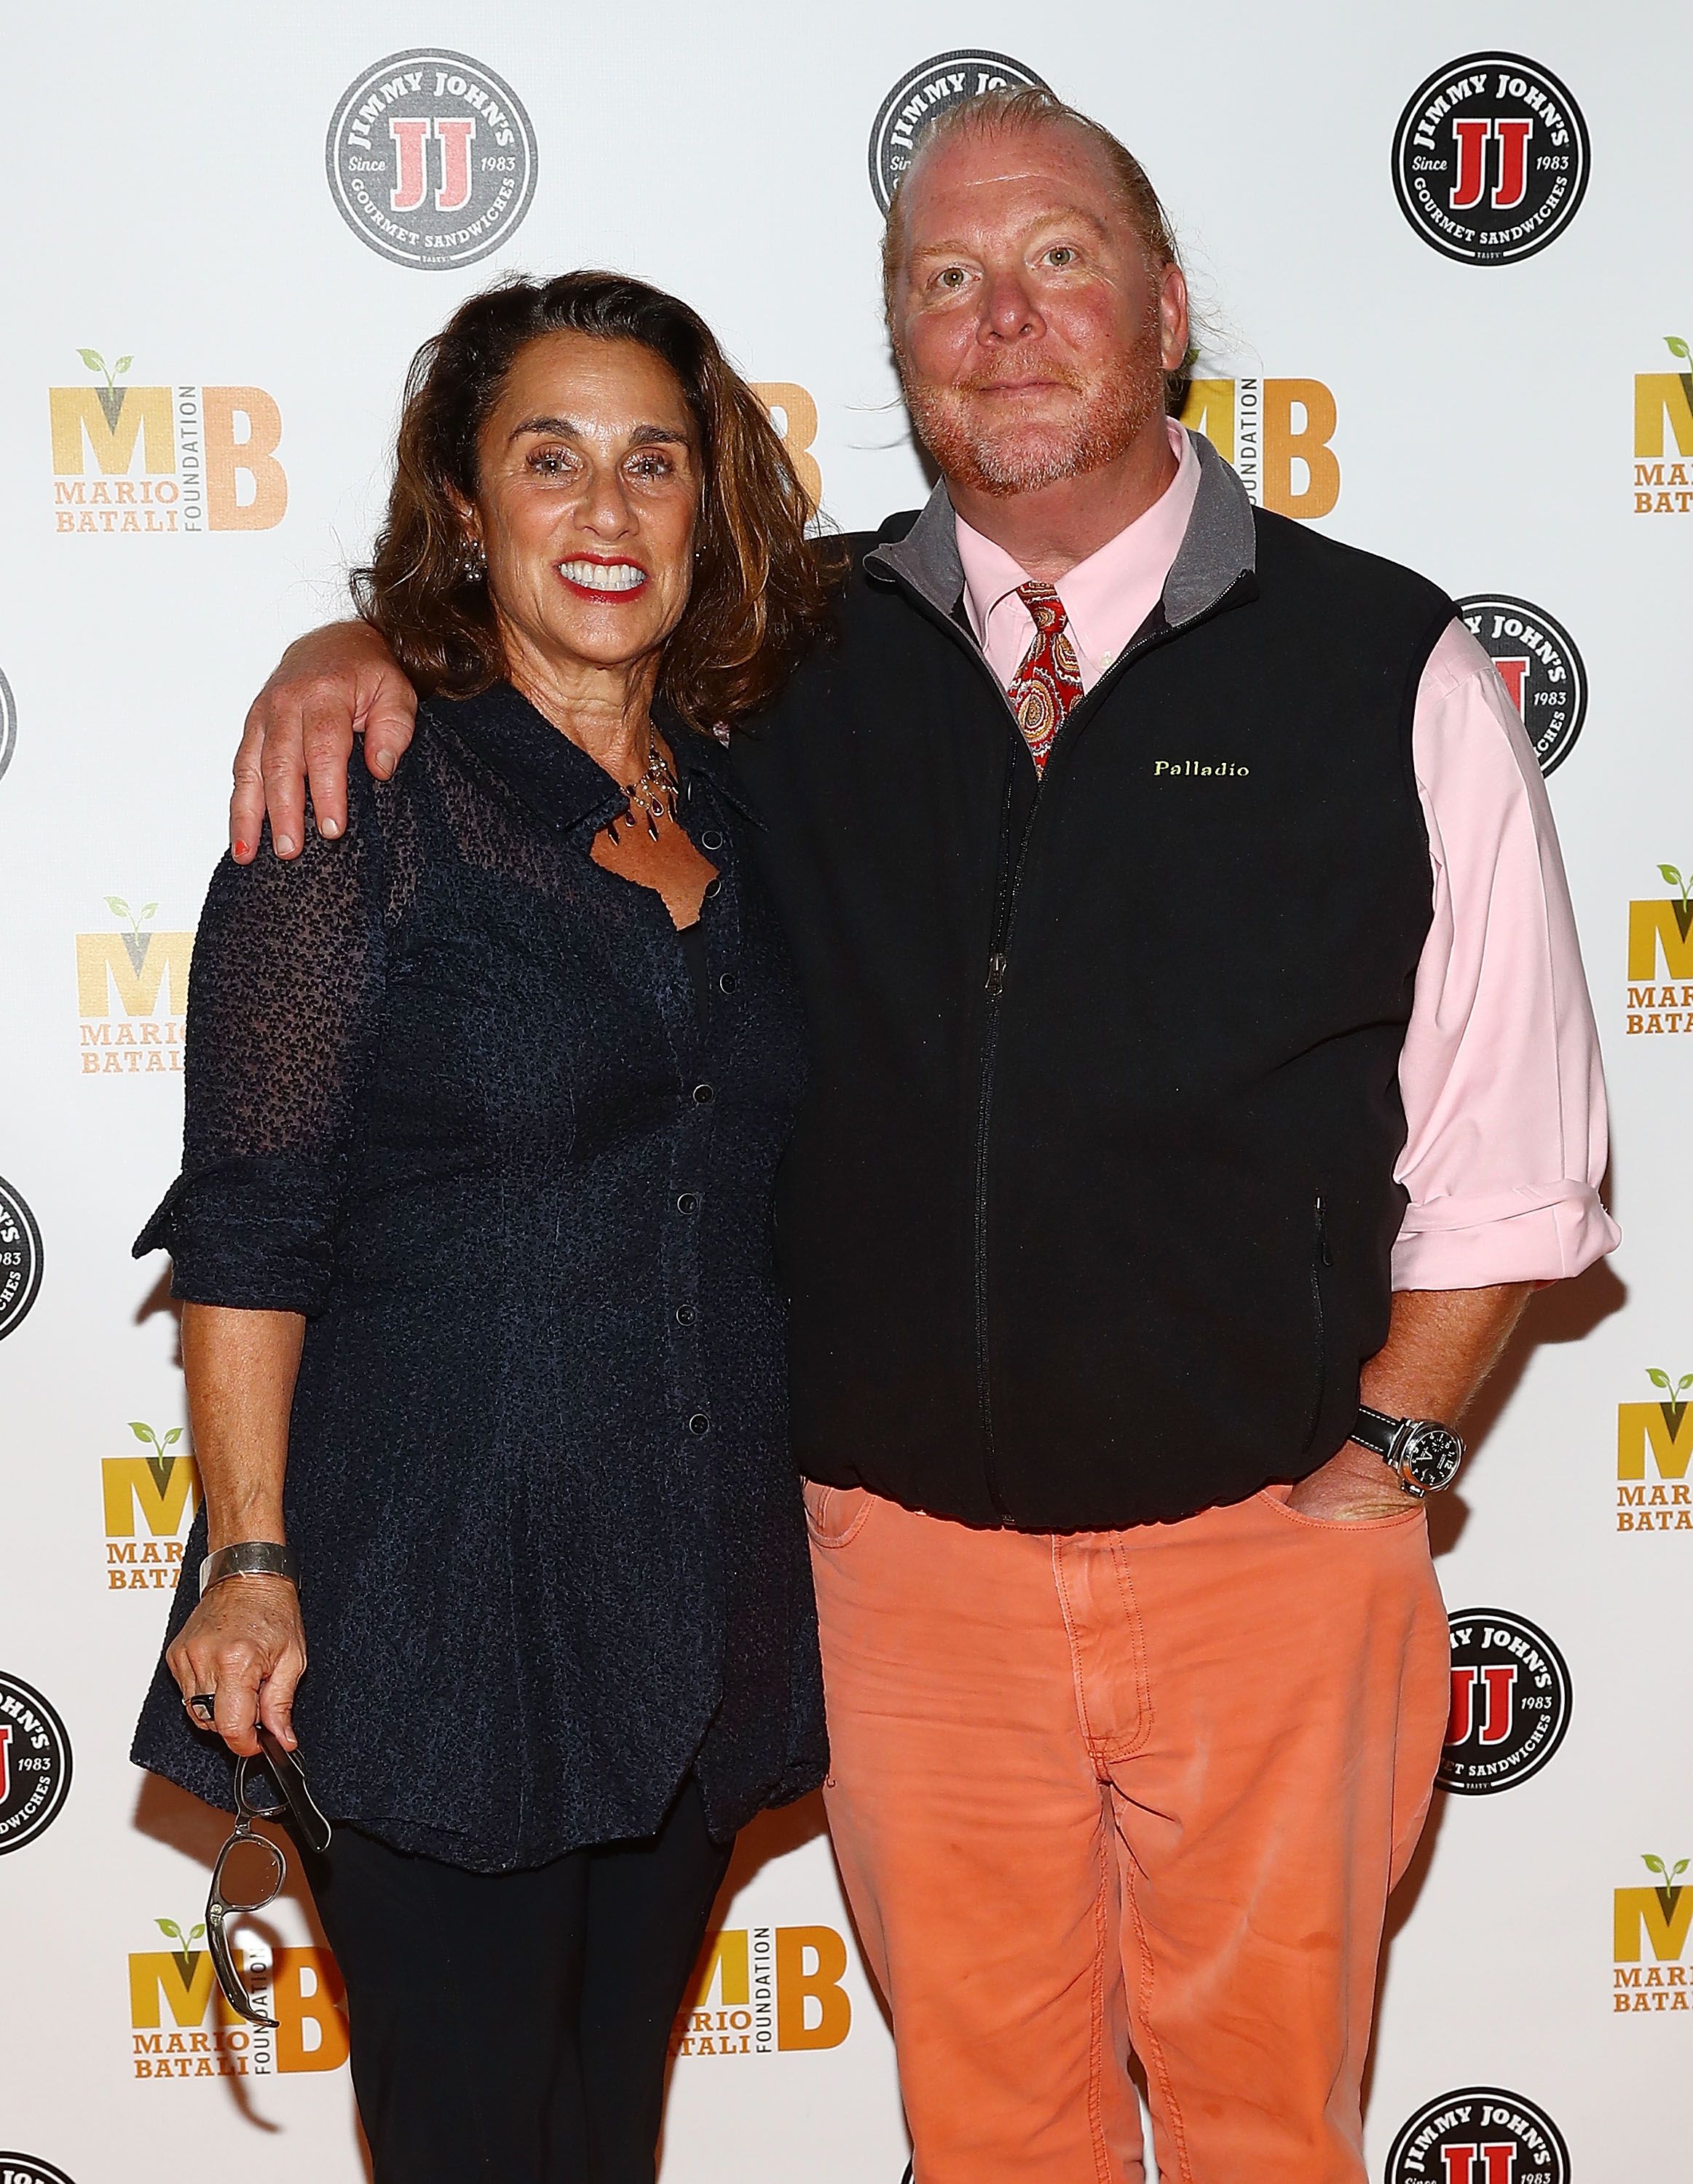 Susi Cahn WikiBio, Net Worth, age, Facts about Mario Batali’s wife